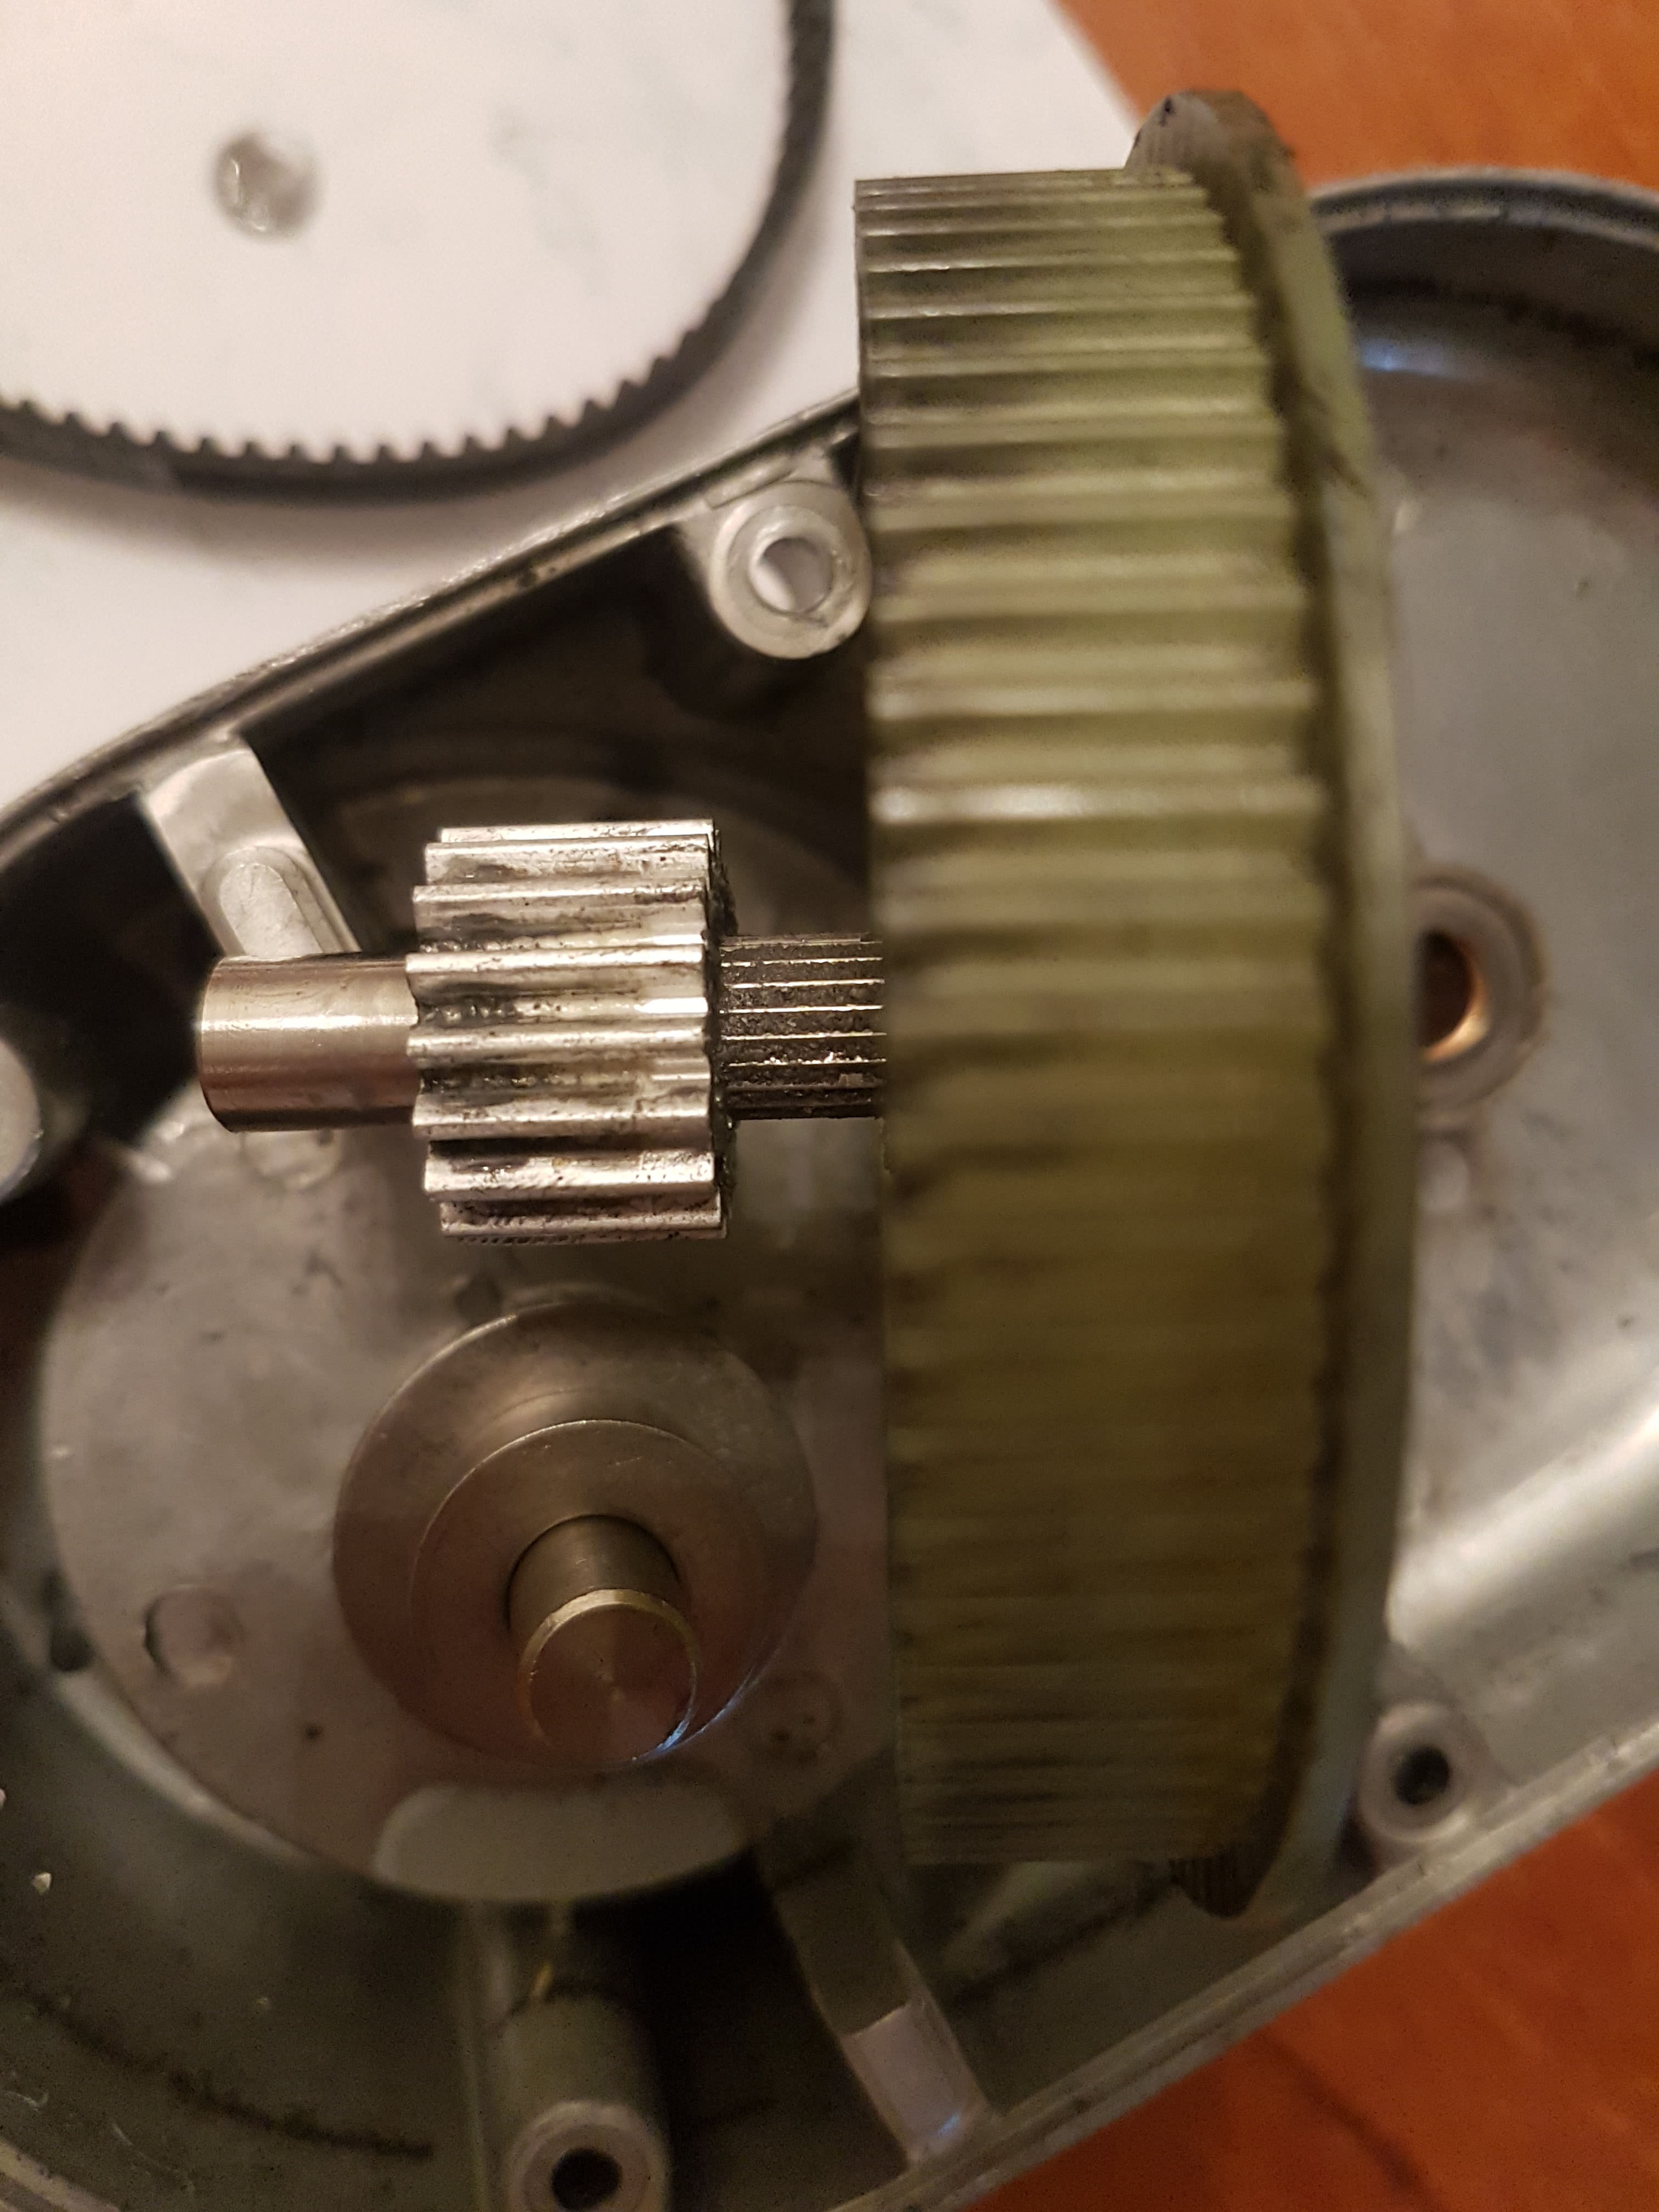 Problems with the KENWOOD AT340 High Speed ​​Slicer